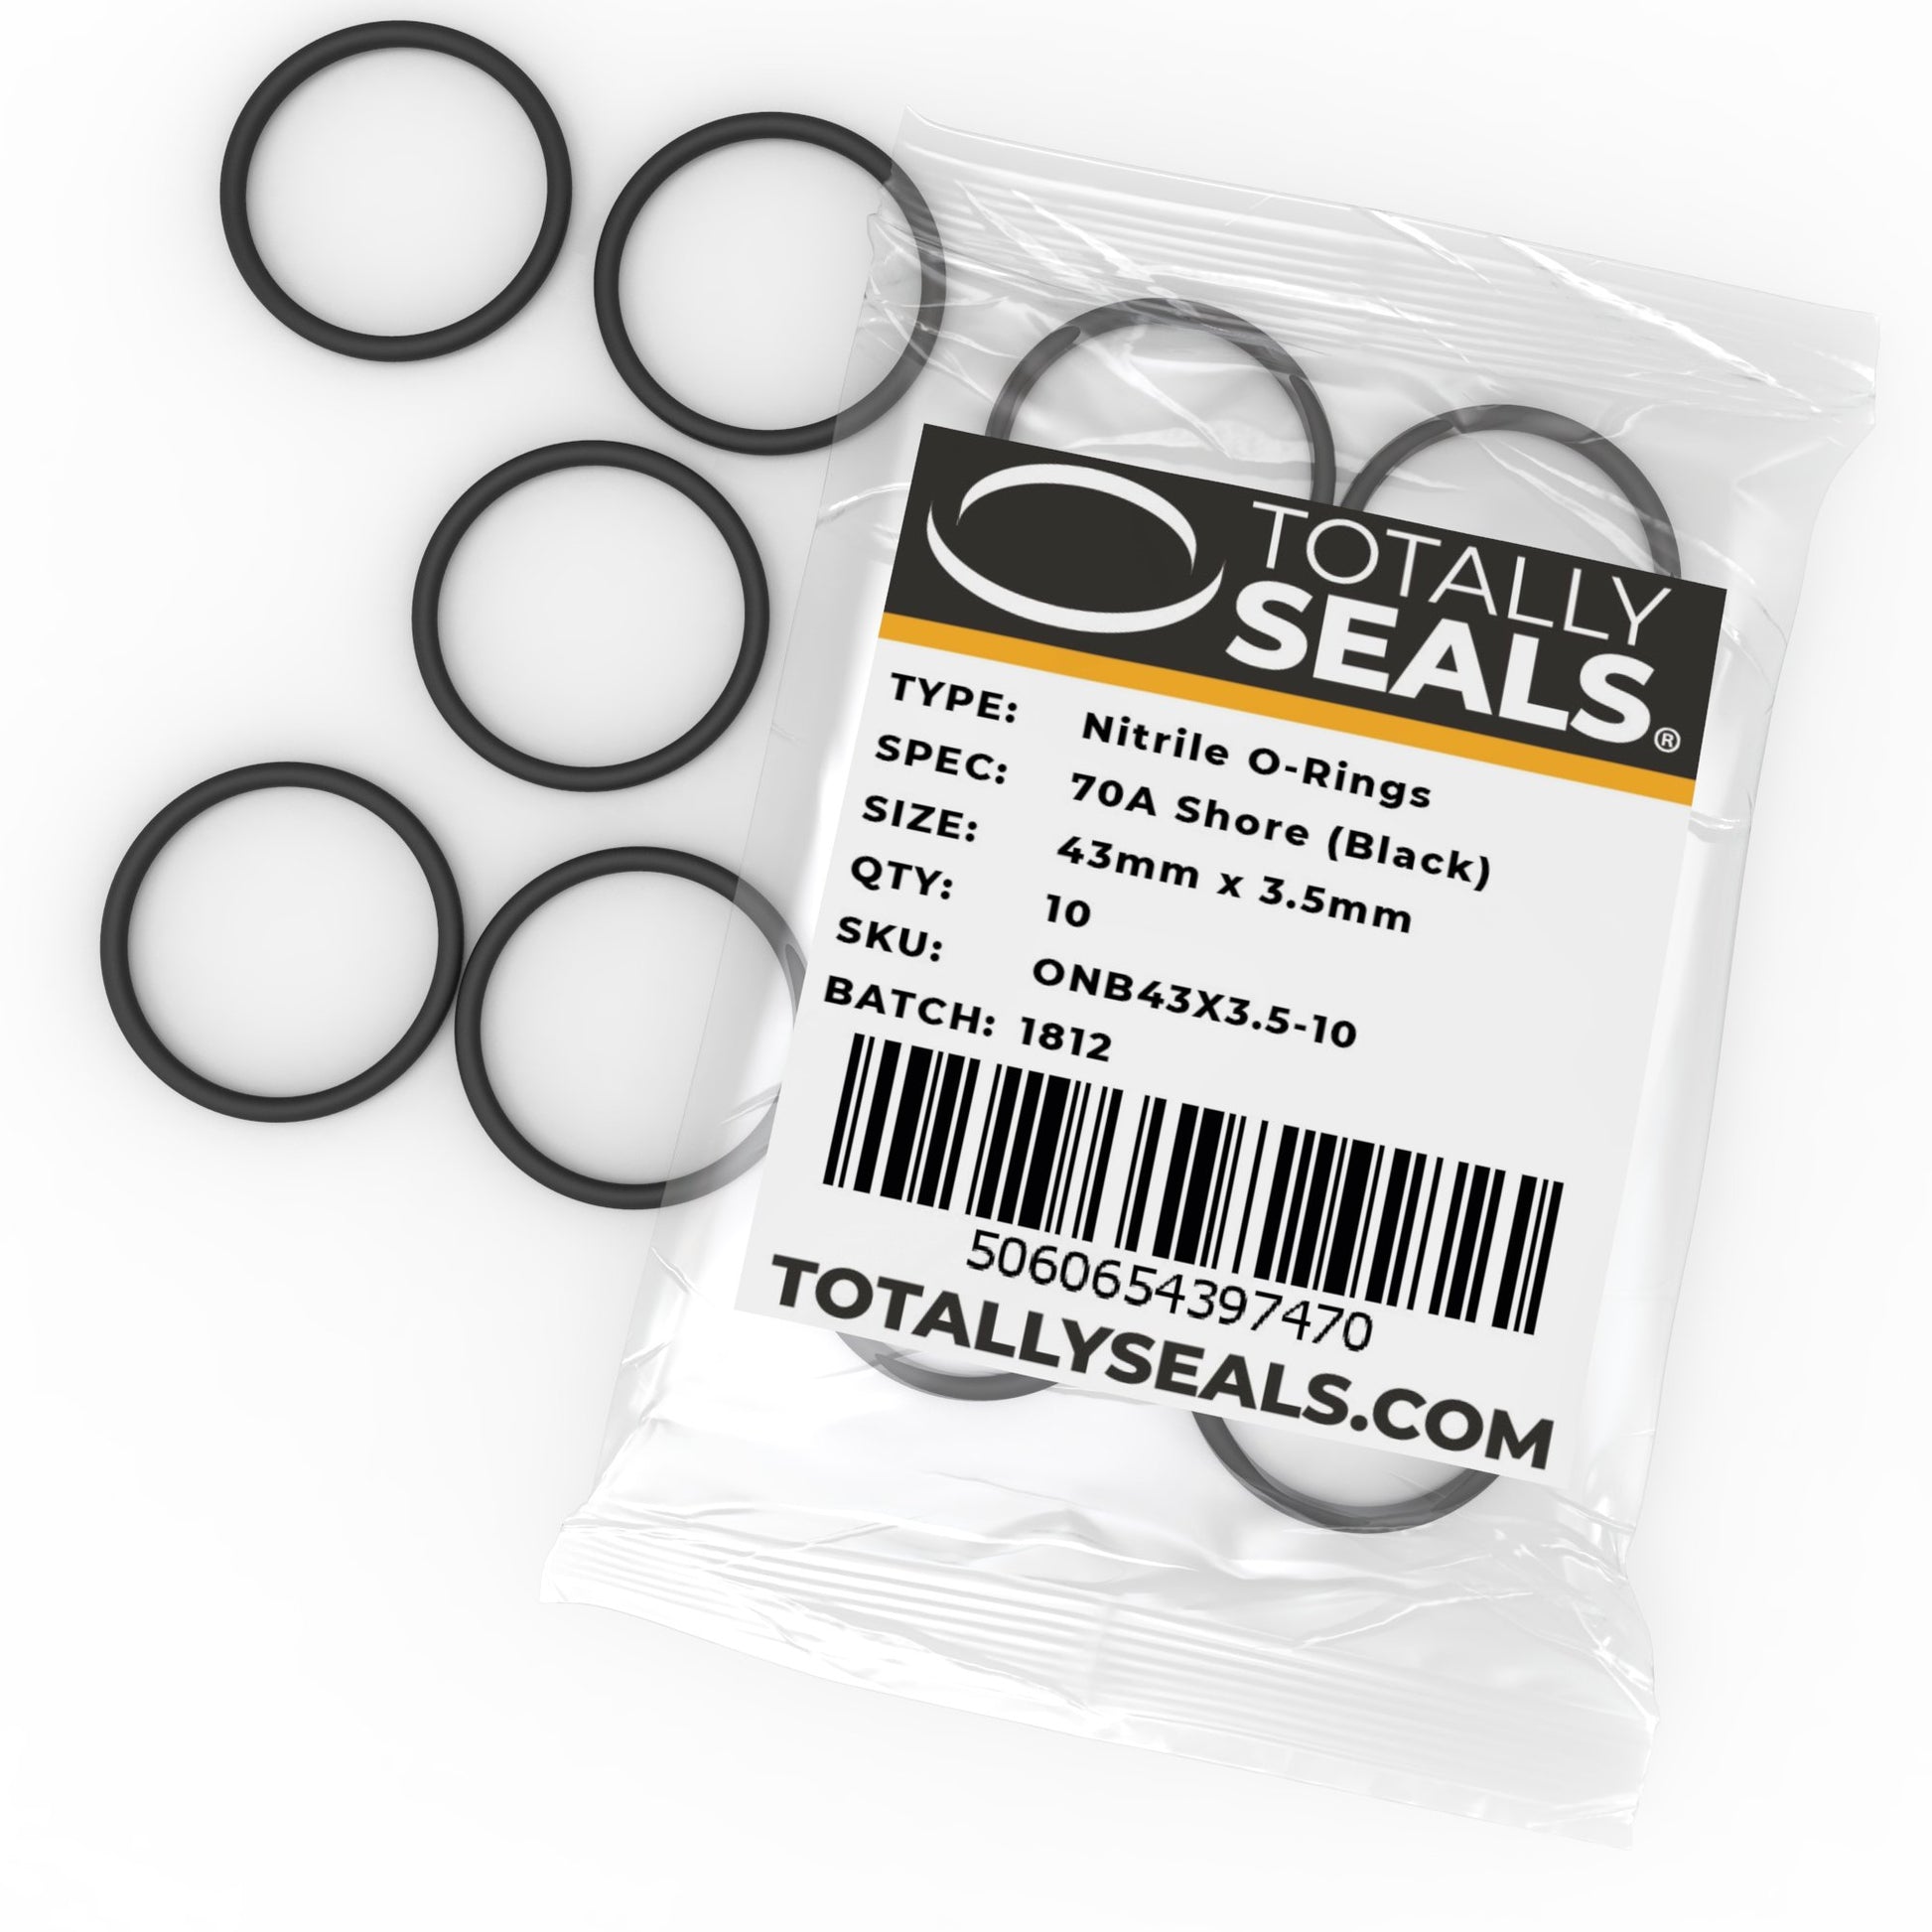 43mm x 3.5mm (50mm OD) Nitrile O-Rings - Totally Seals®